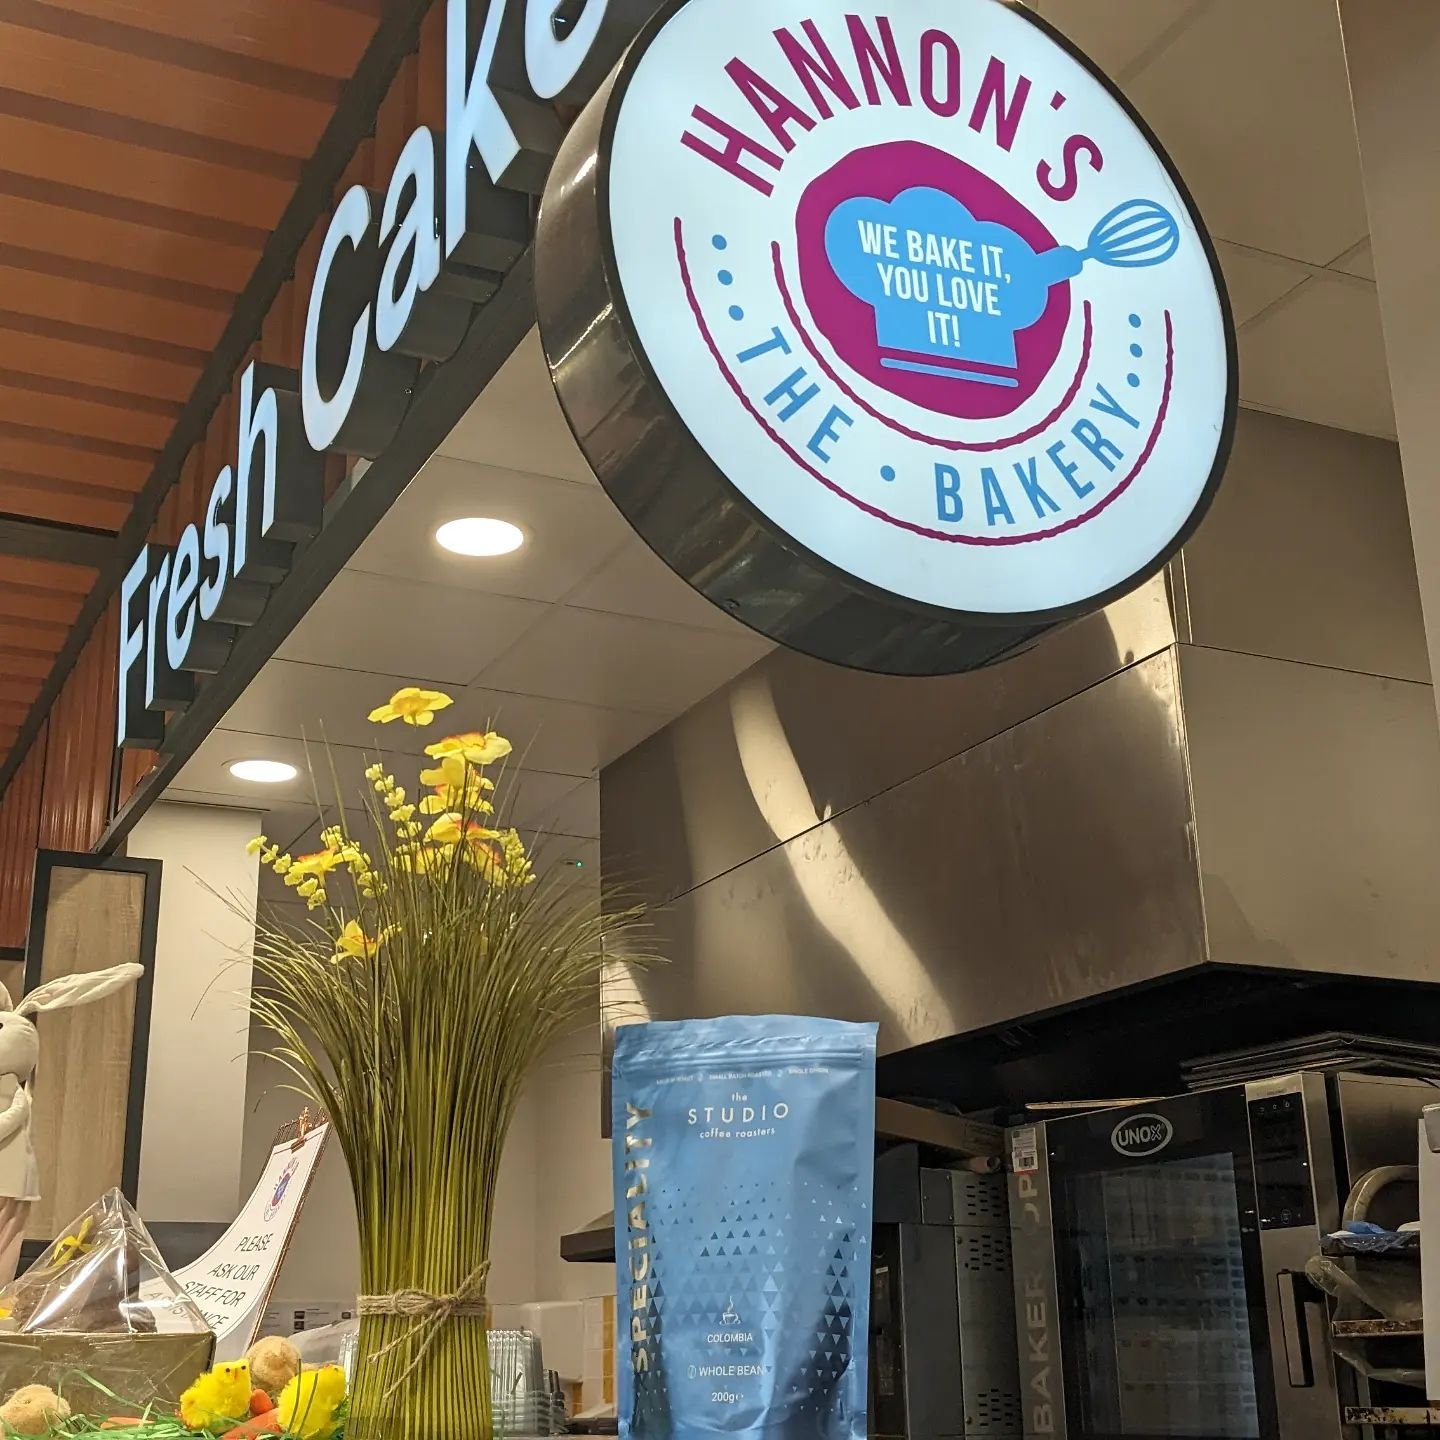 We had a great time this morning doing a coffee ☕ tasting at @hannons_supervalu_ratoath
Lovely staff, shop &amp; local products😊and not to forget the delicious 🤤 Hannon's baked goods 🍰
When doing your shop it's so so important to support #tasteloc